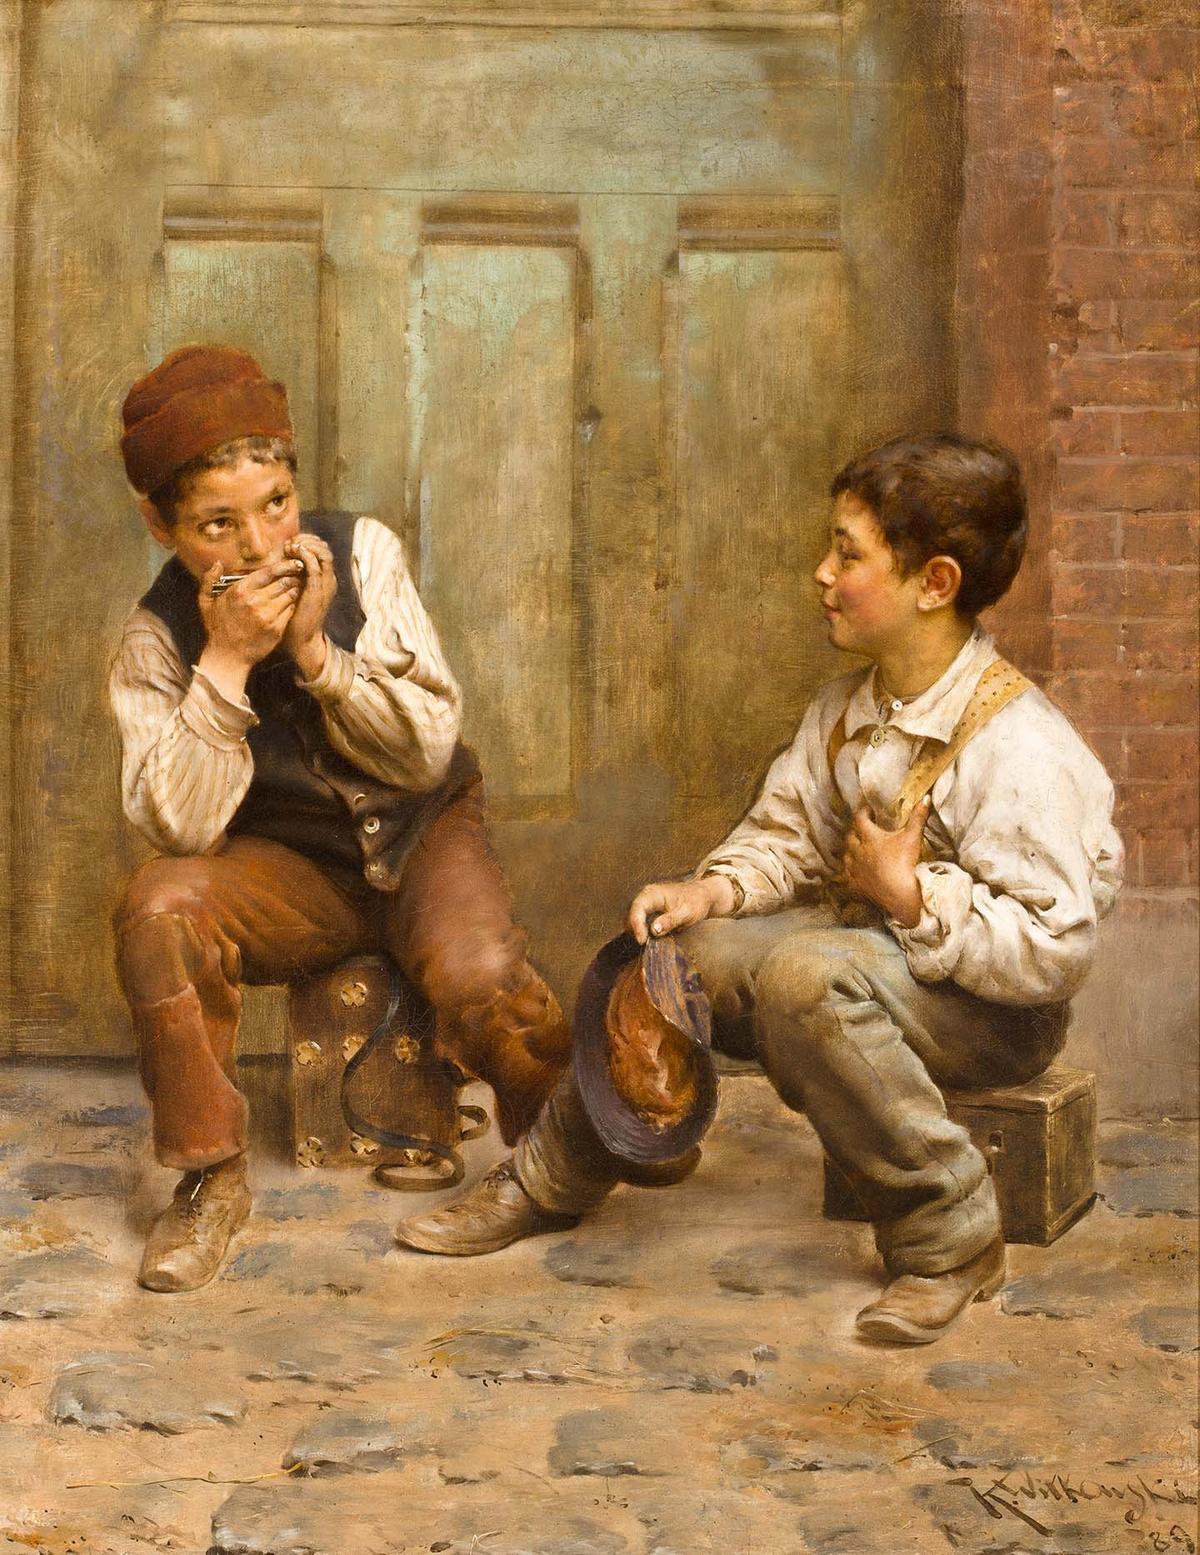 "Shoeshine Boys," 1889, by Karl Witkowski. Oil on canvas. Private collection. (Public Domain)